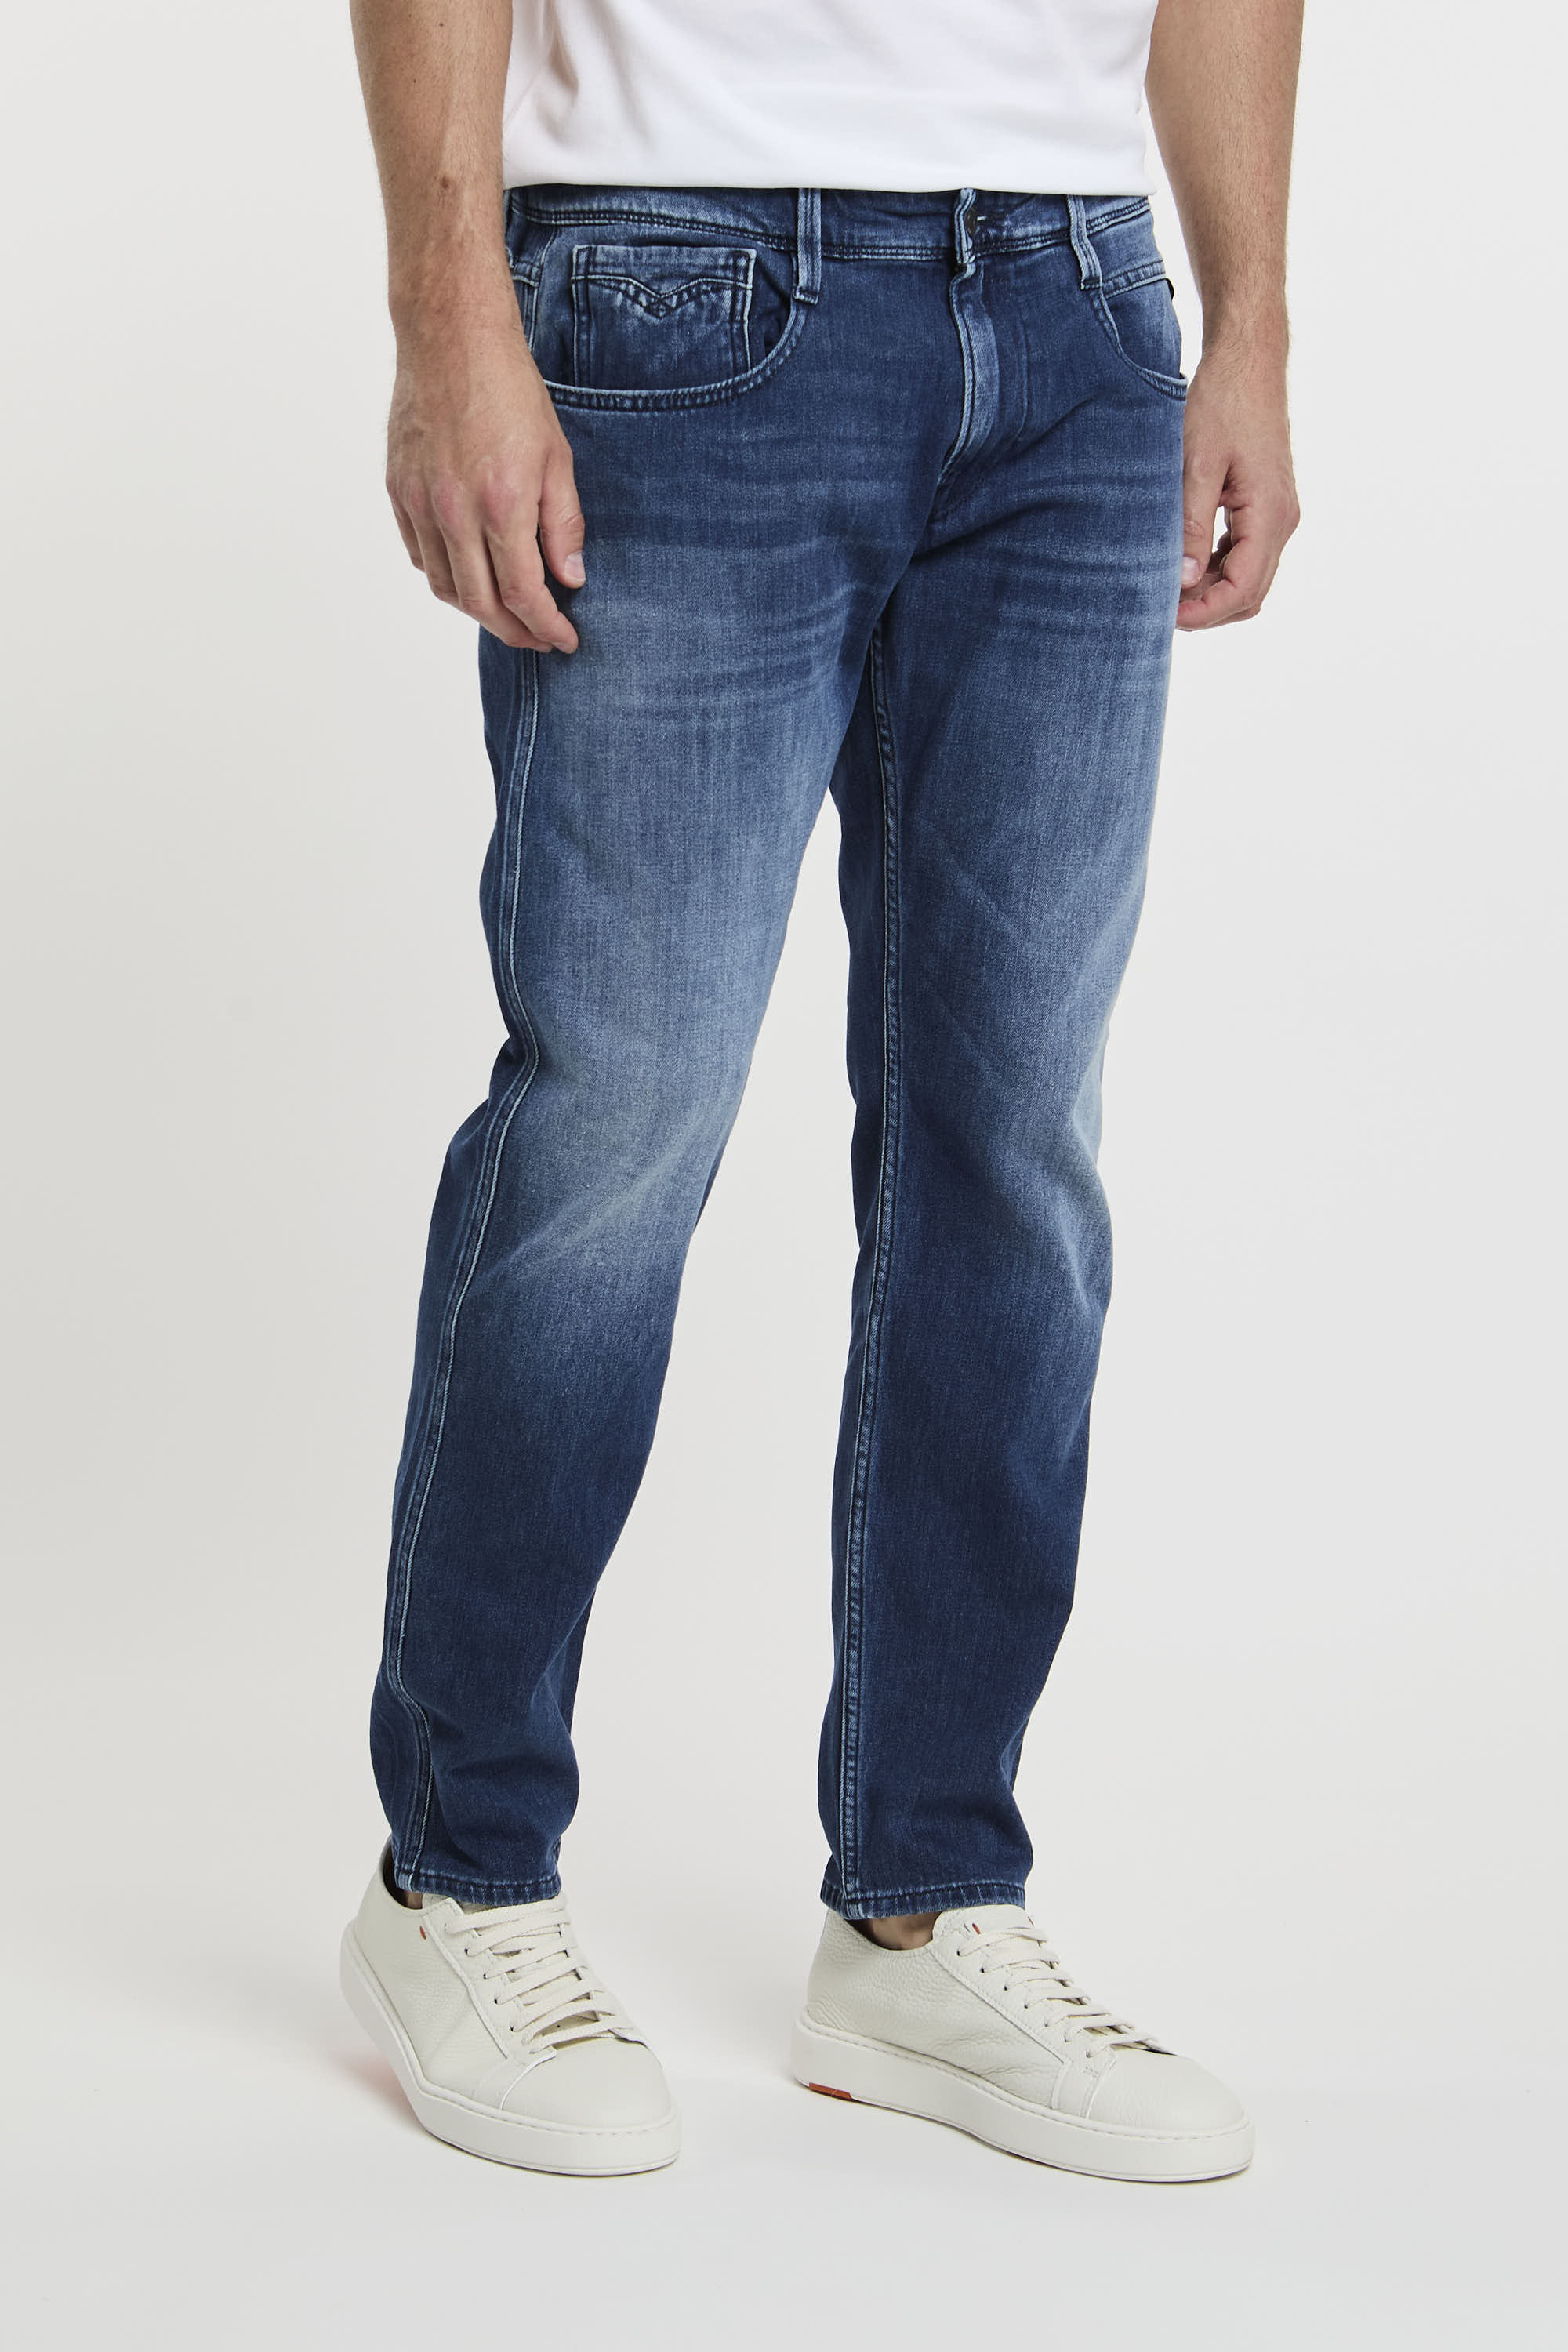 Replay Jeans Slim Fit Anbass Baumwolle/Polyester Denim-3